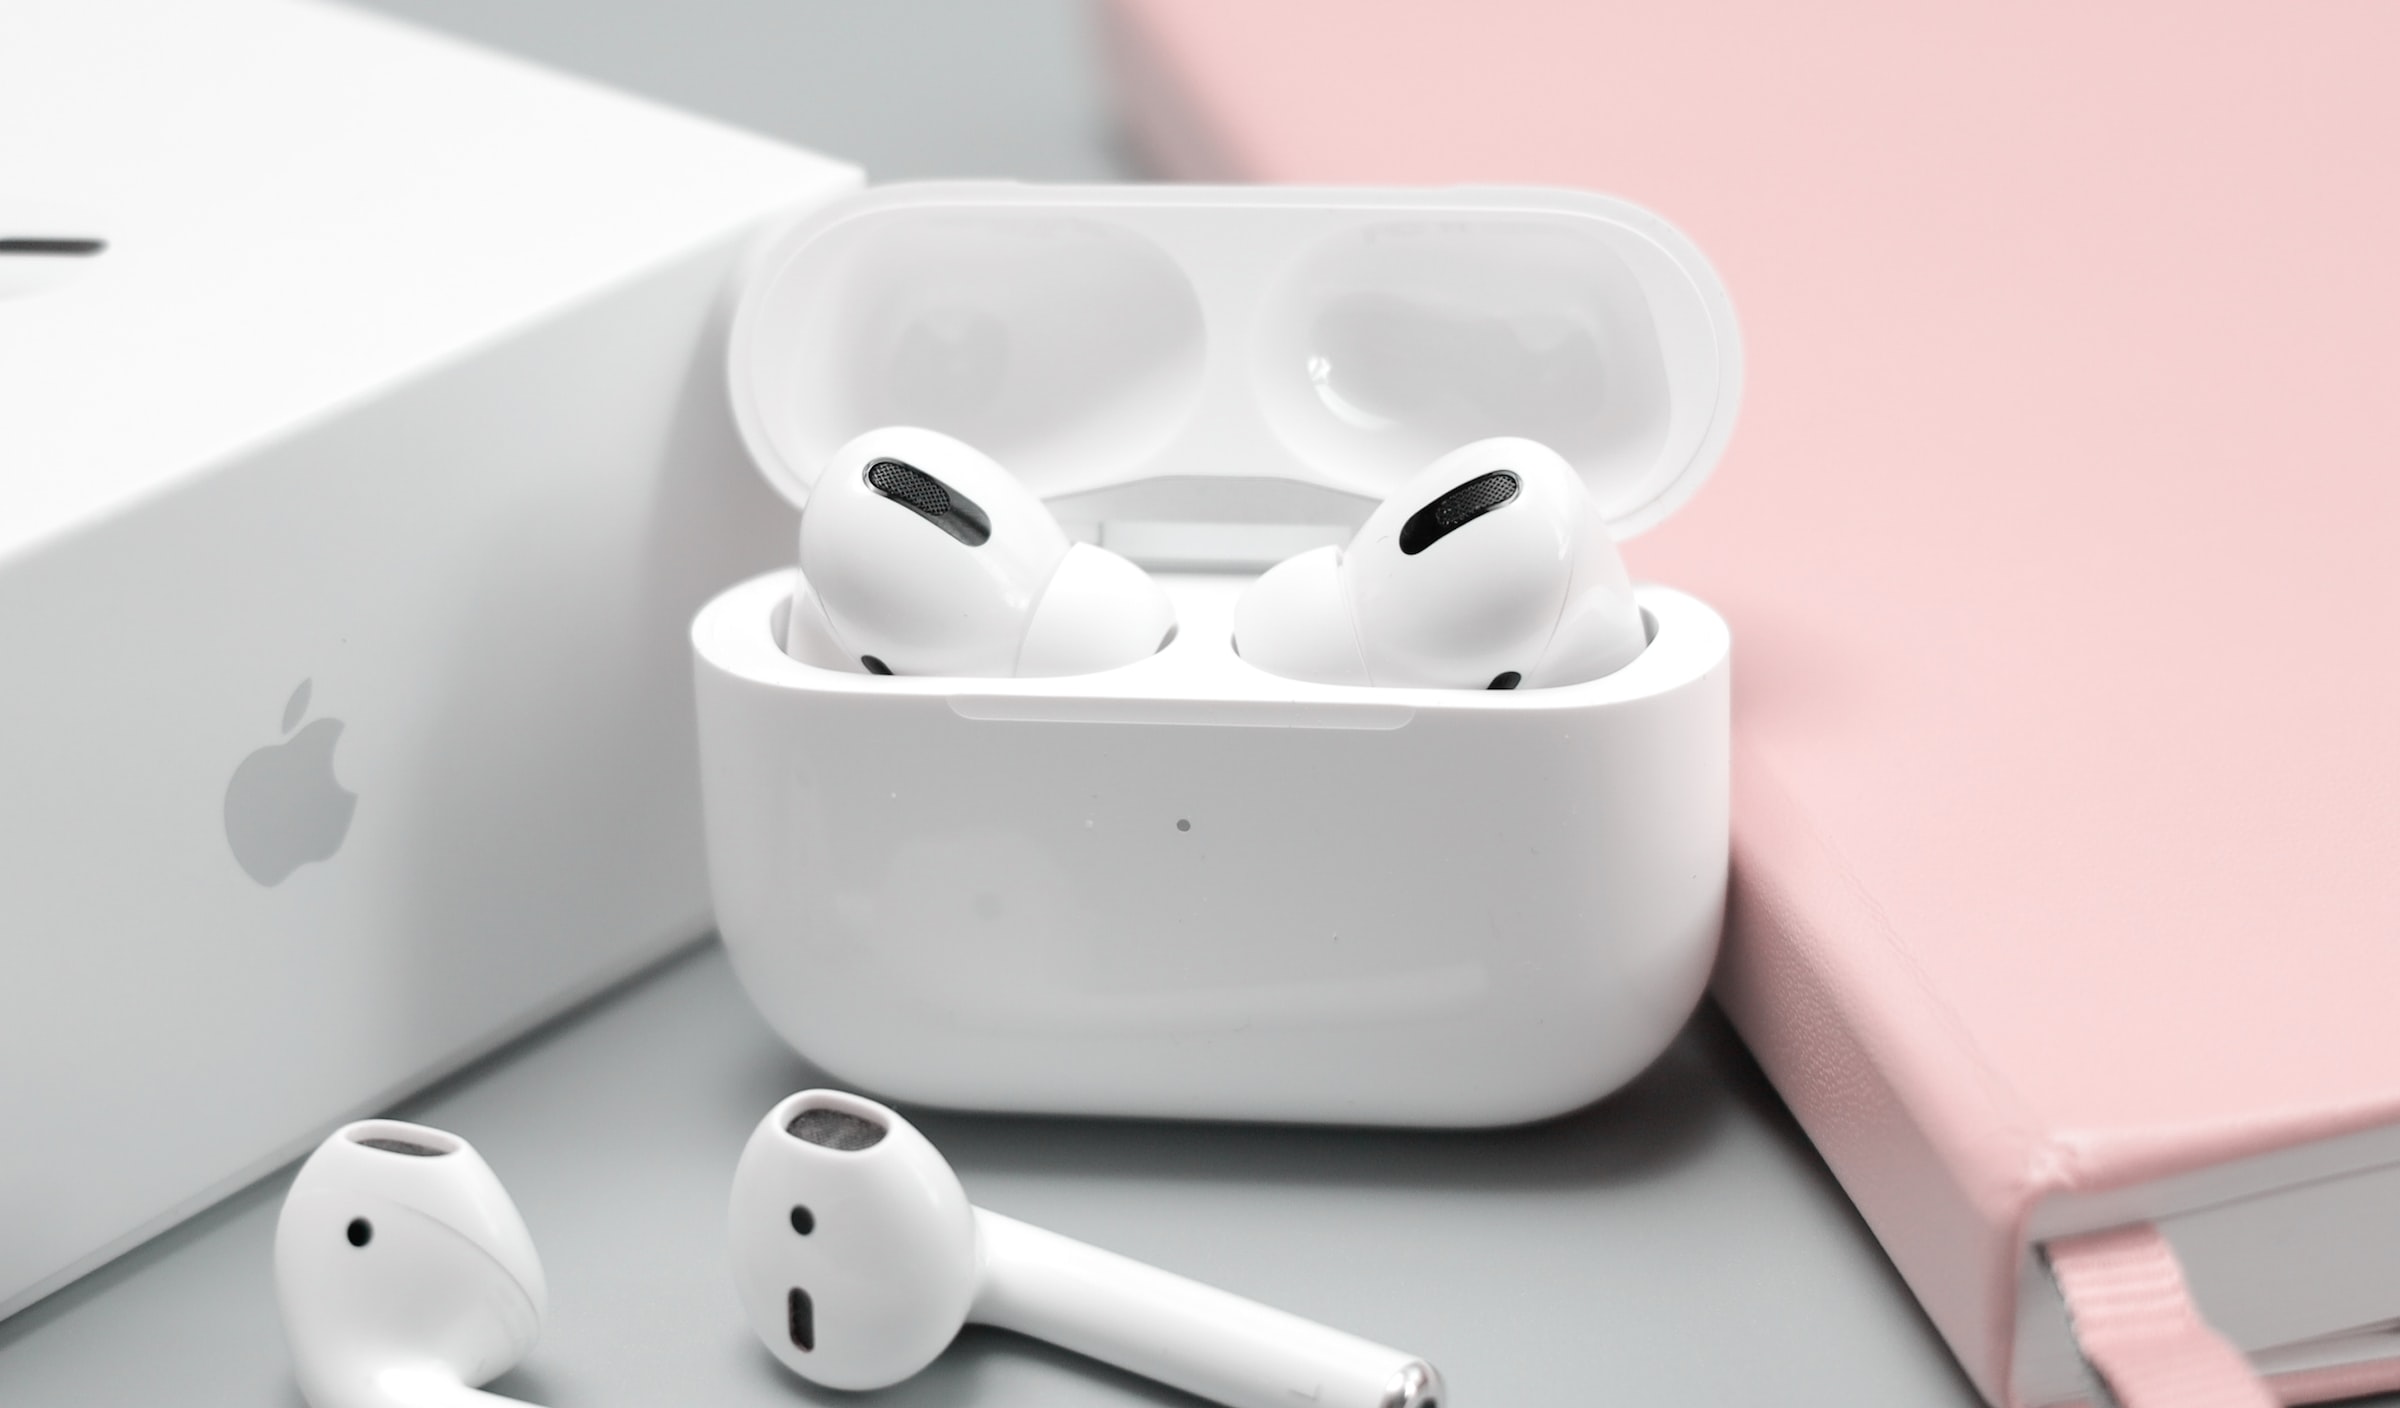 Apple AirPods Microphone Not Working? Top 10 Ways to Fix